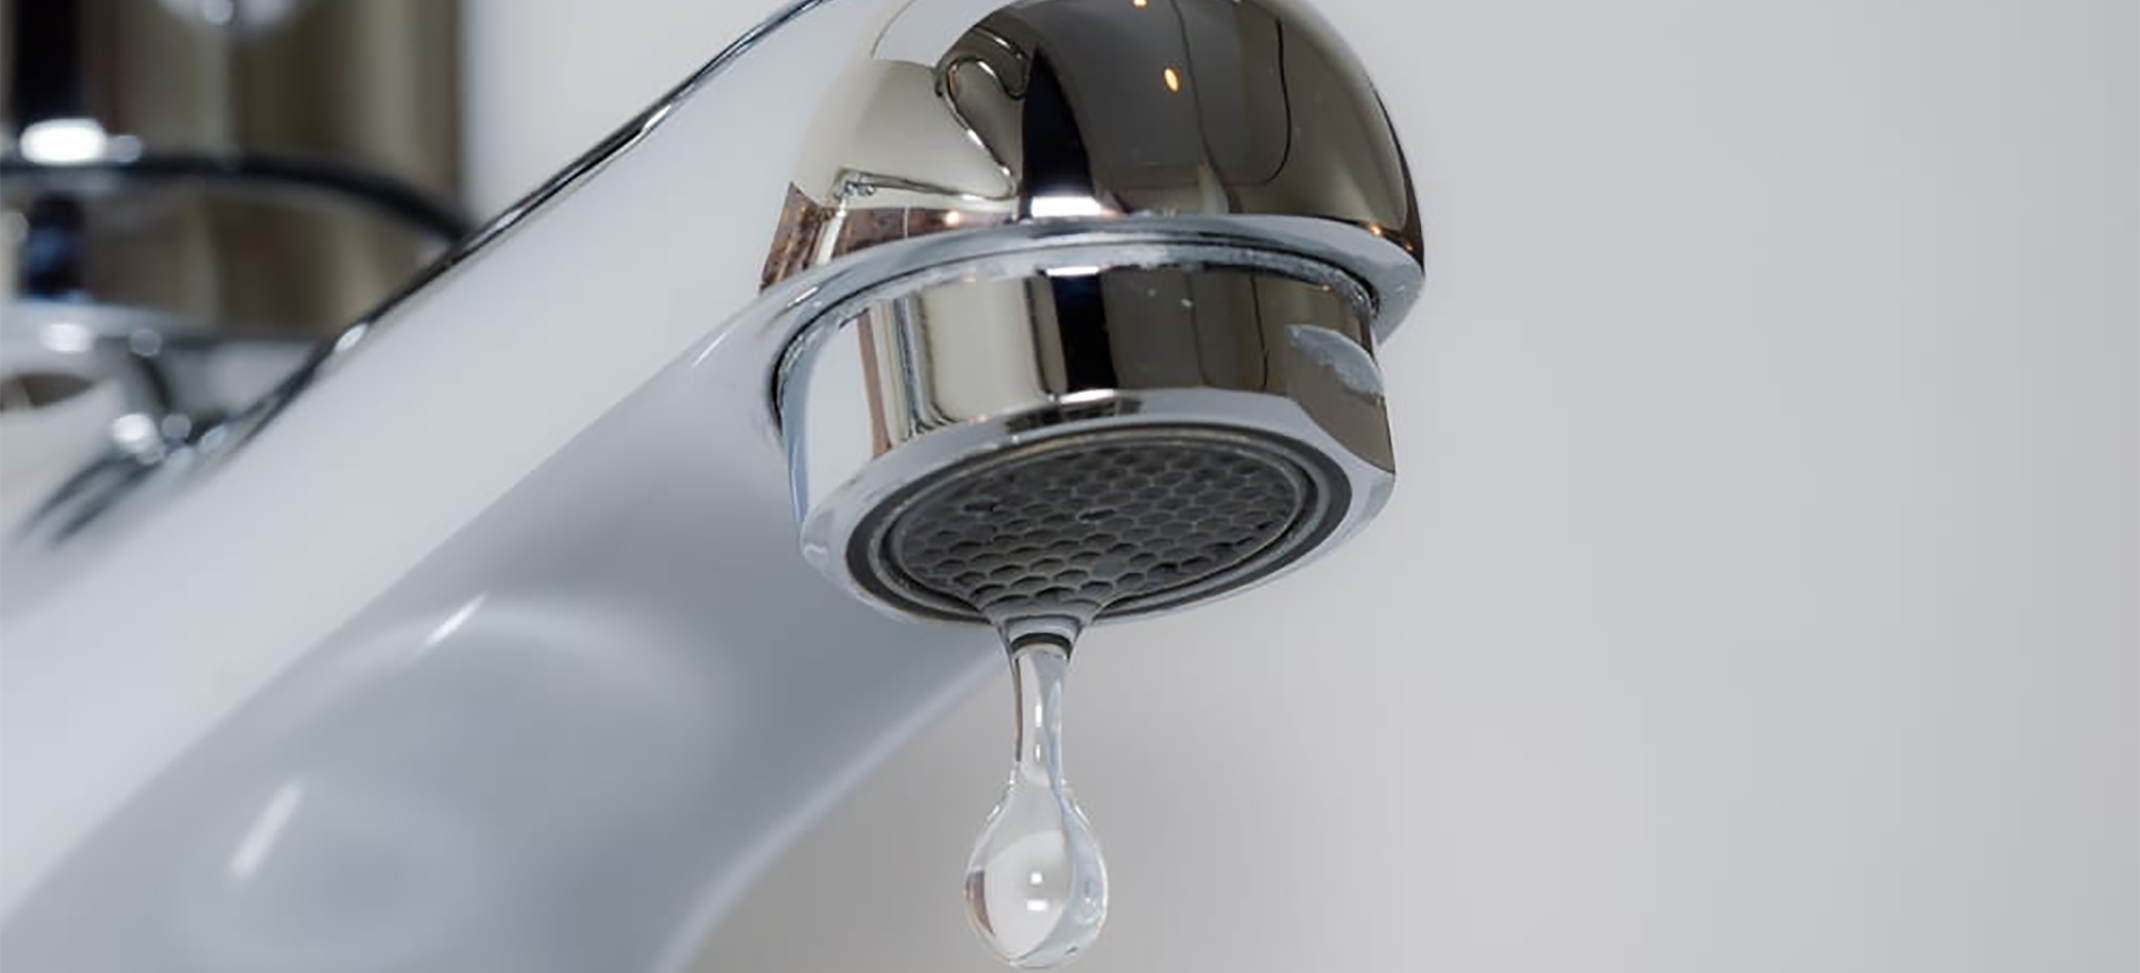 Plumbing Deals - How to Change a Faucet